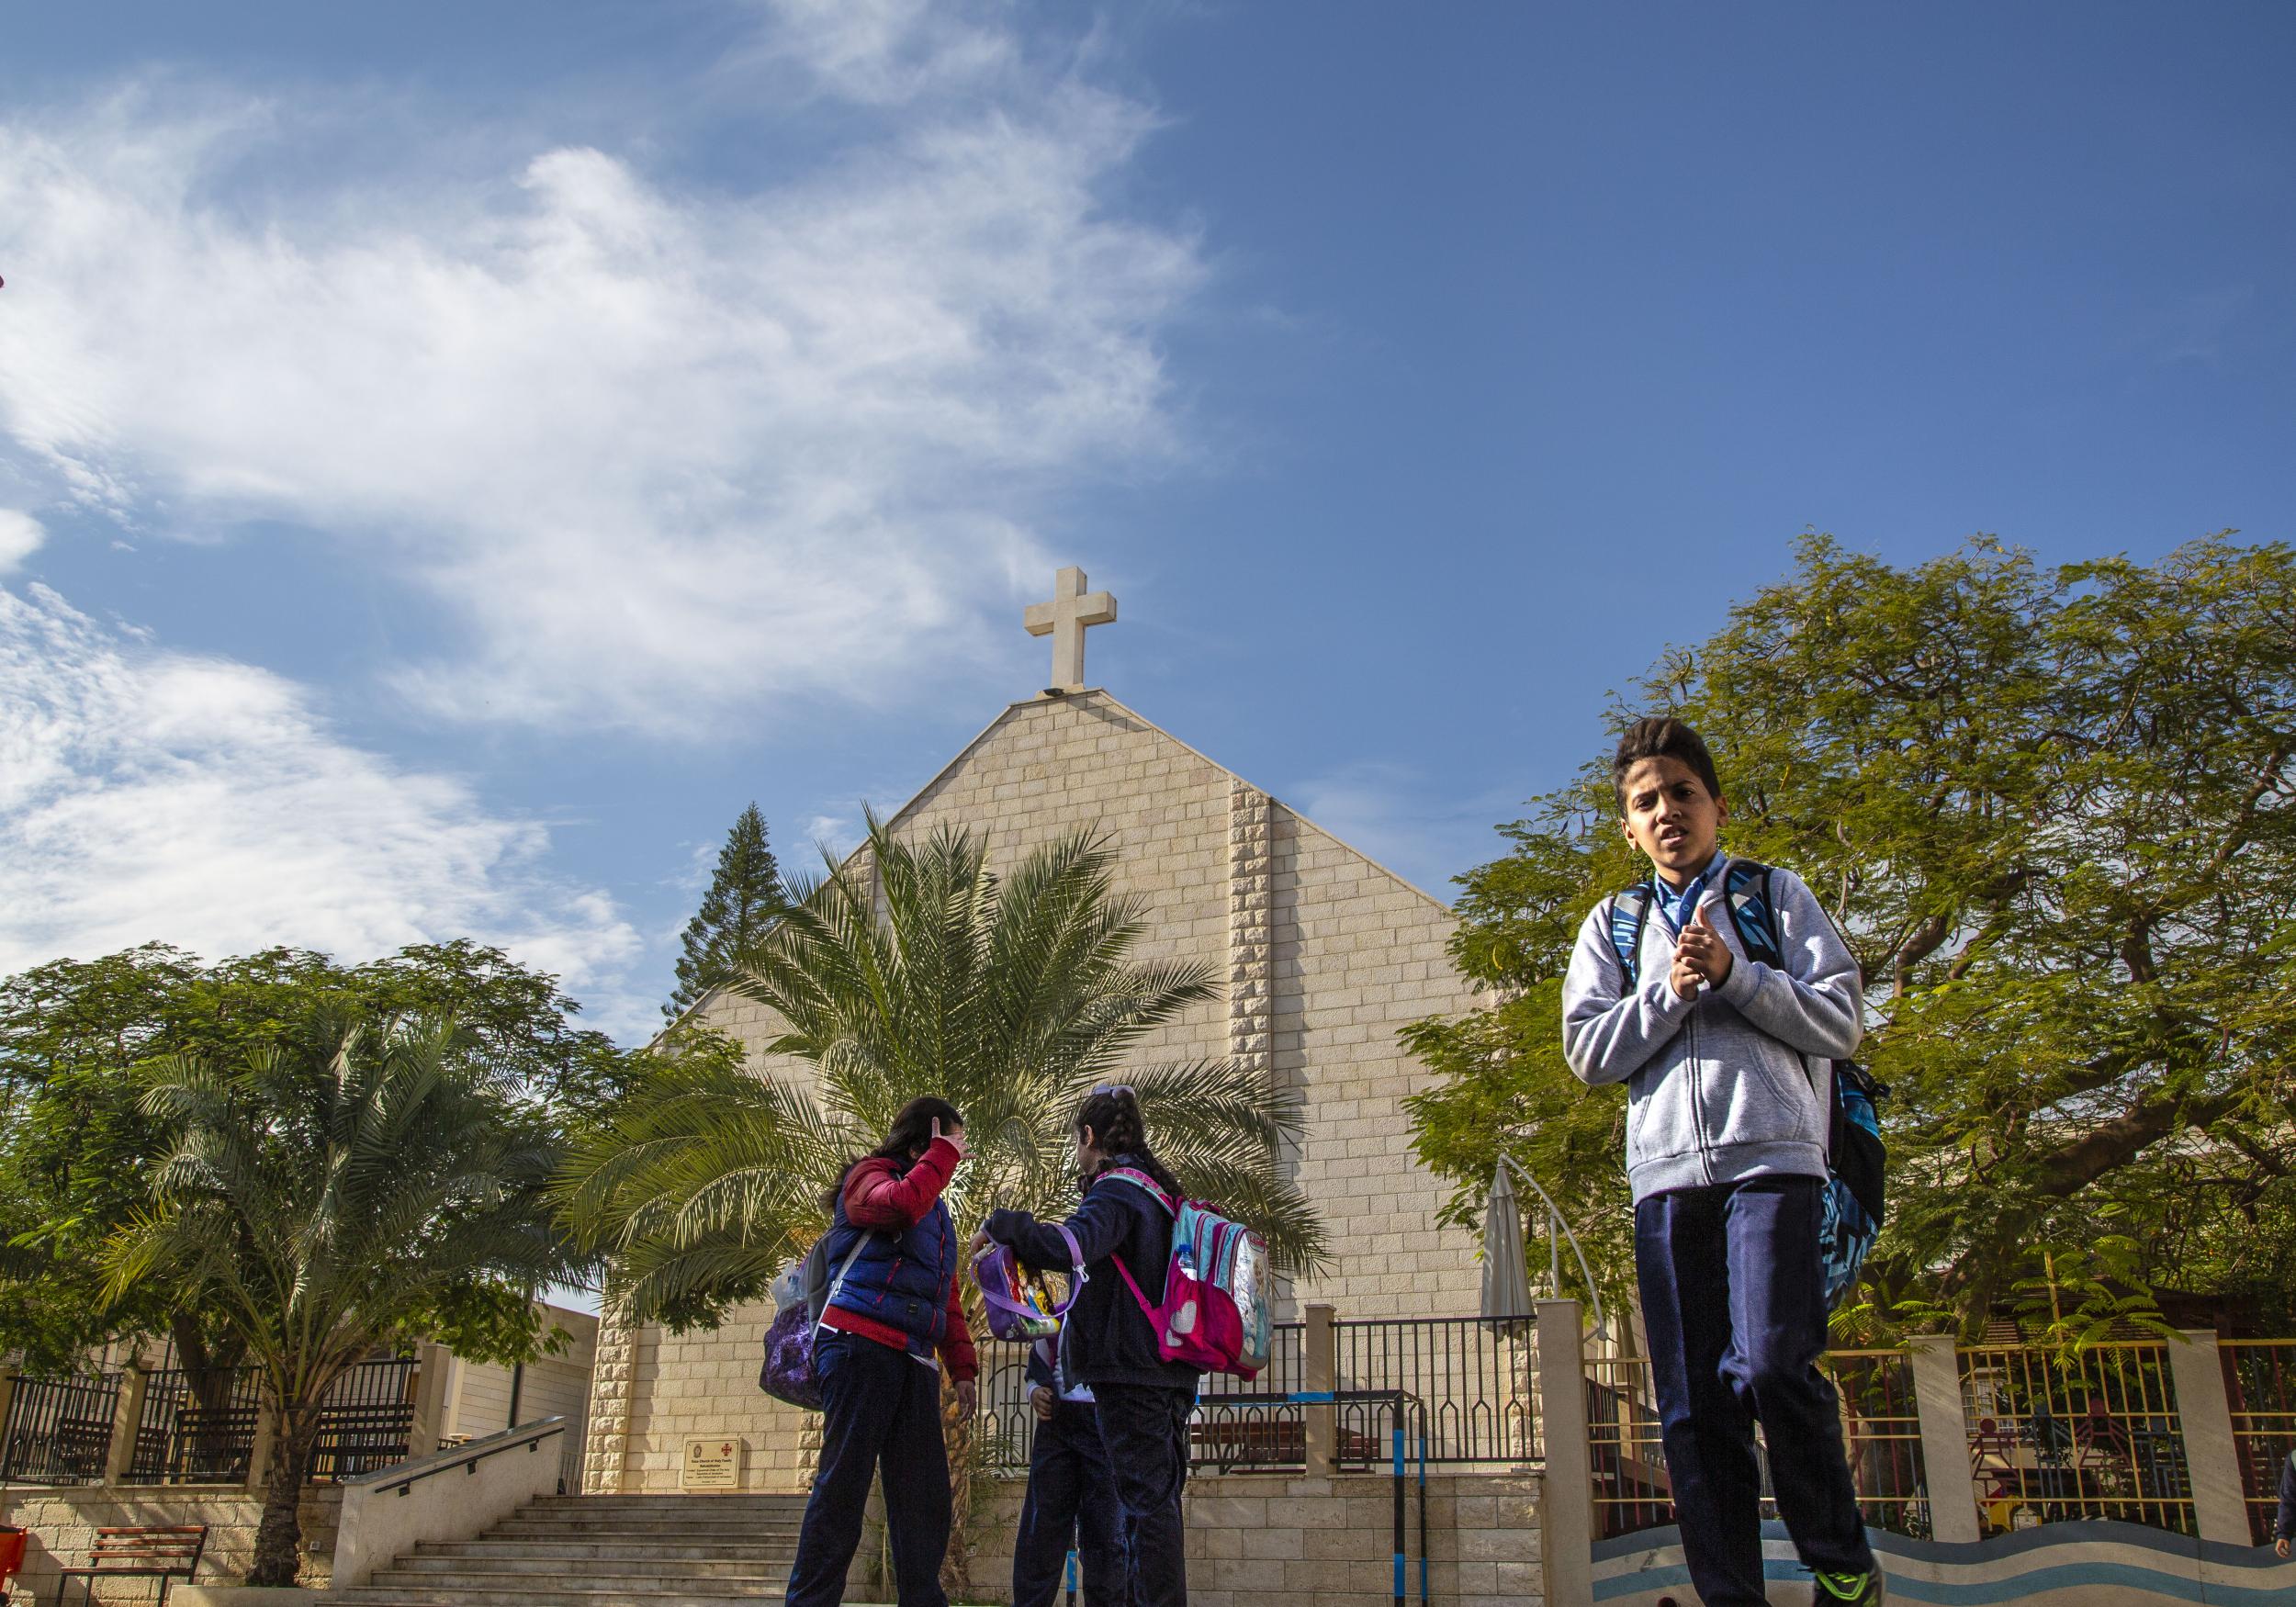 School children play outside in the courtyard of the Holy Family Church in Gaza